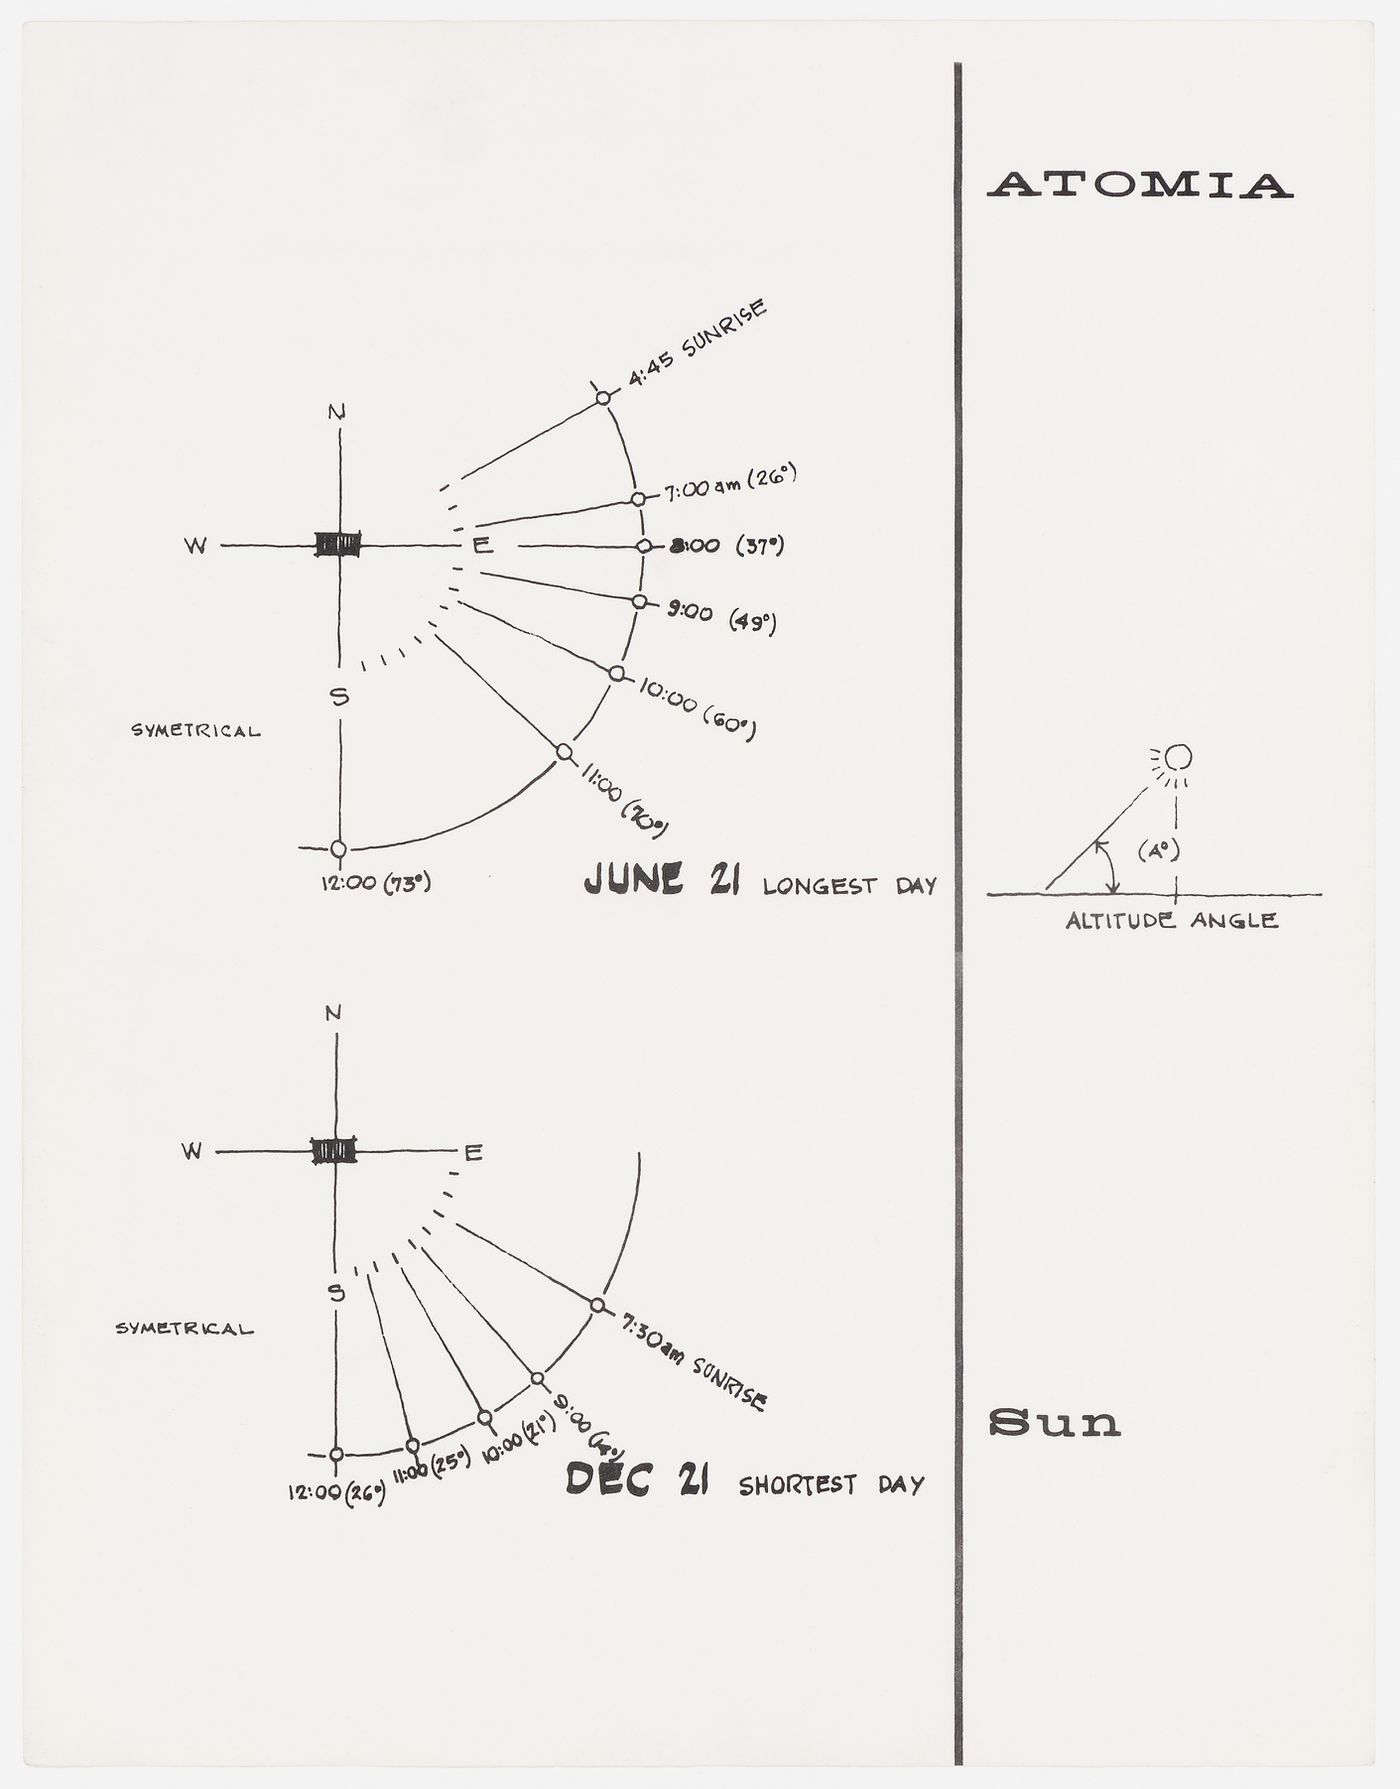 Atomia: diagrams showing angles of sunlight at selected times on June 21st and December 21st (document from the Atom project records)